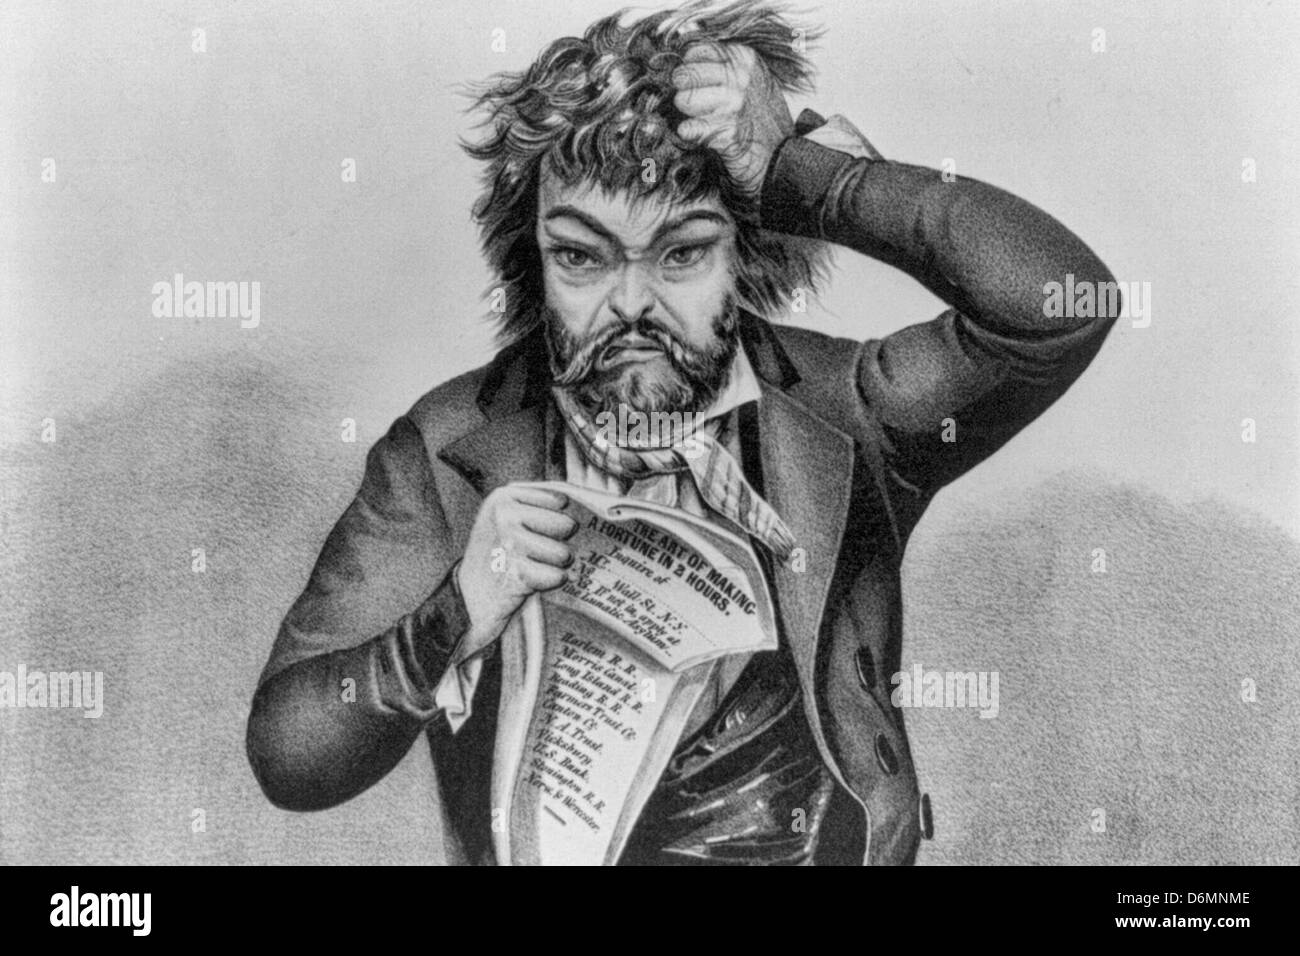 Stocks down - Crazy looking man pulling at his hair when the market goes down, Irca 1849 Stock Photo